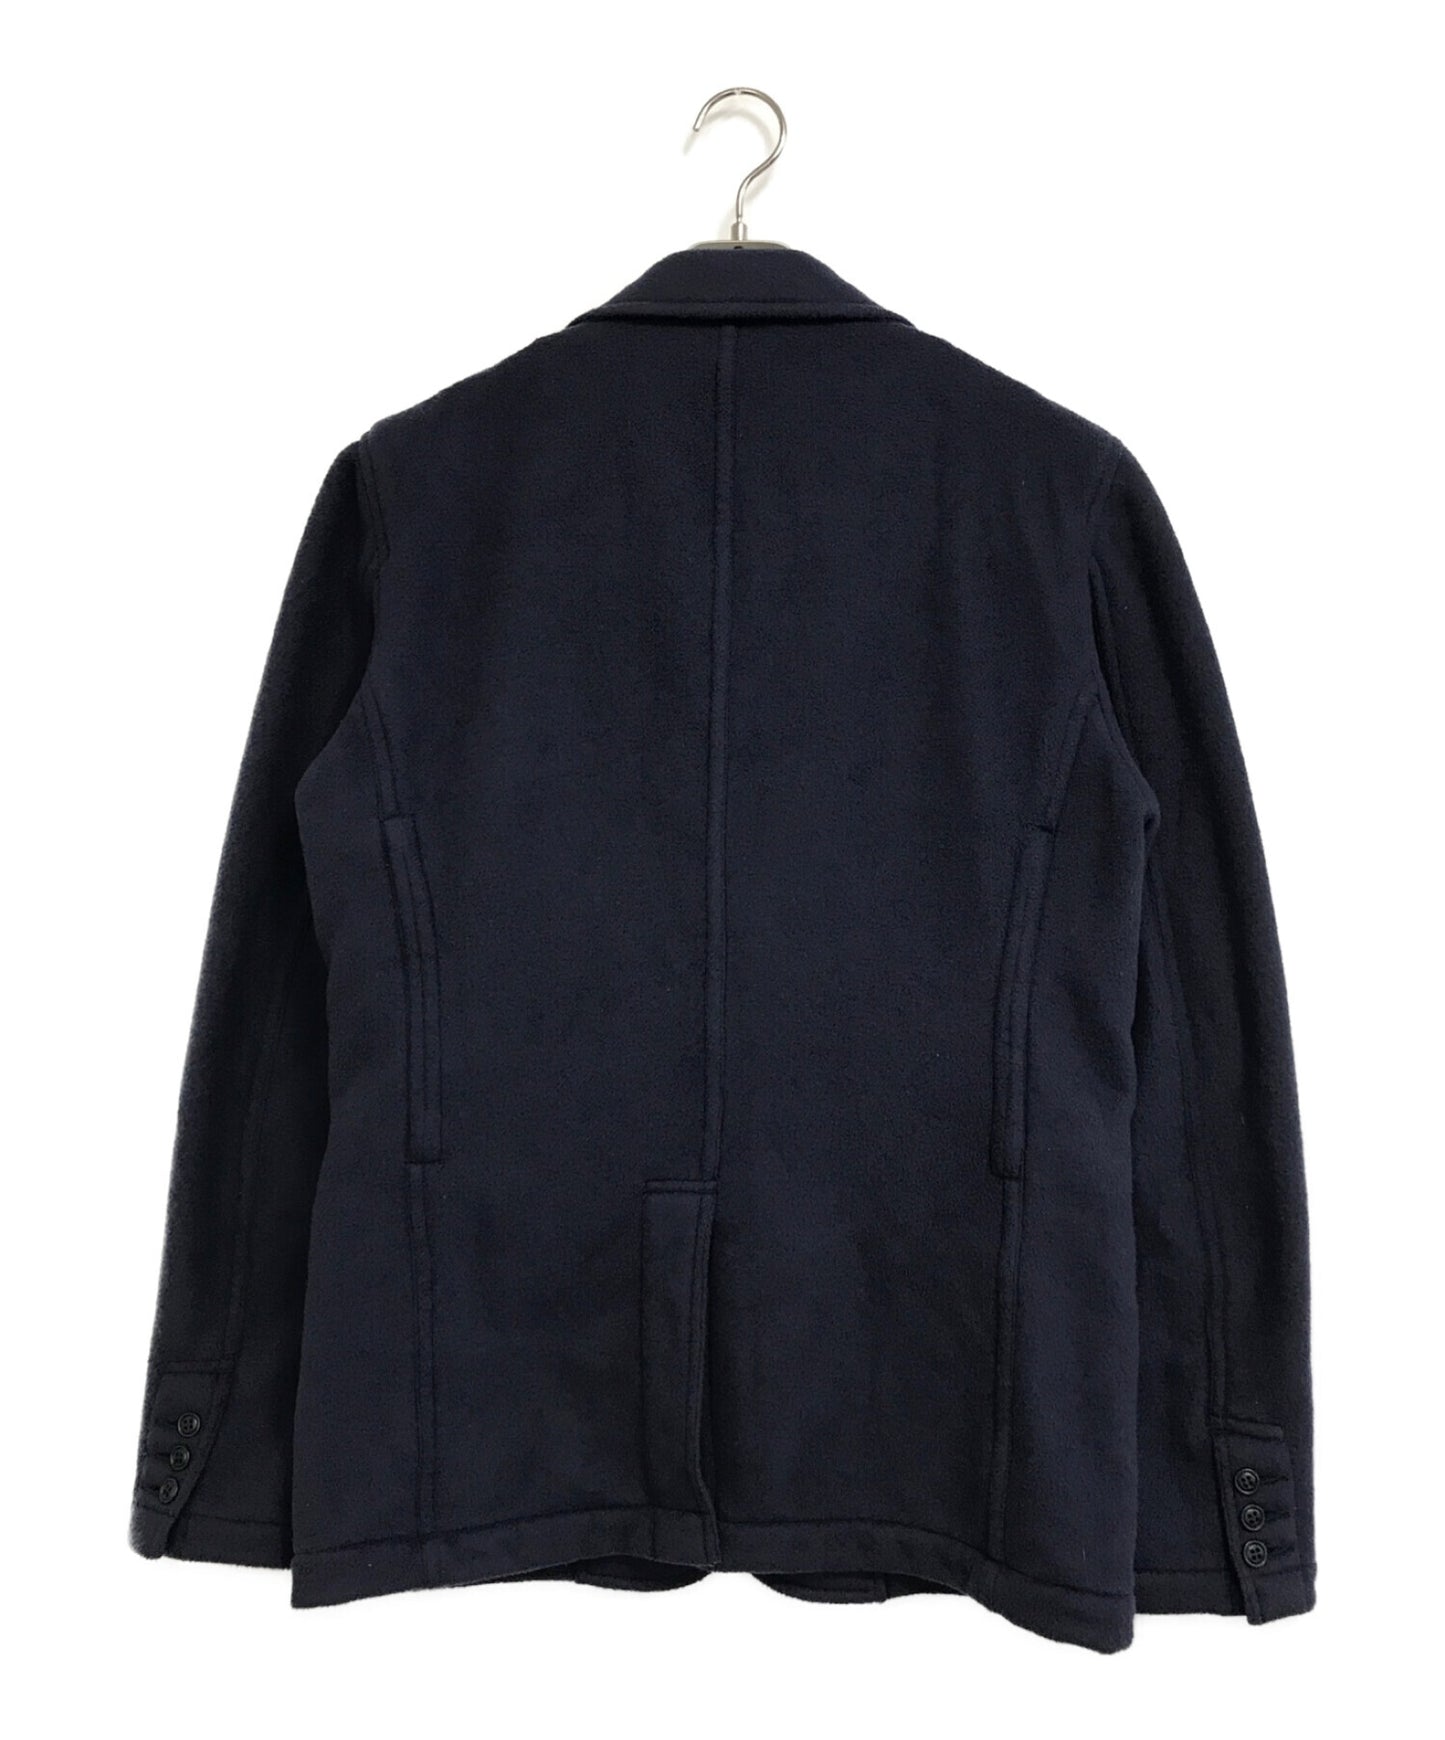 COMME DES GARCONS HOMME PLUS FAUX LAINERED TATEMARED 재킷 PF-J084